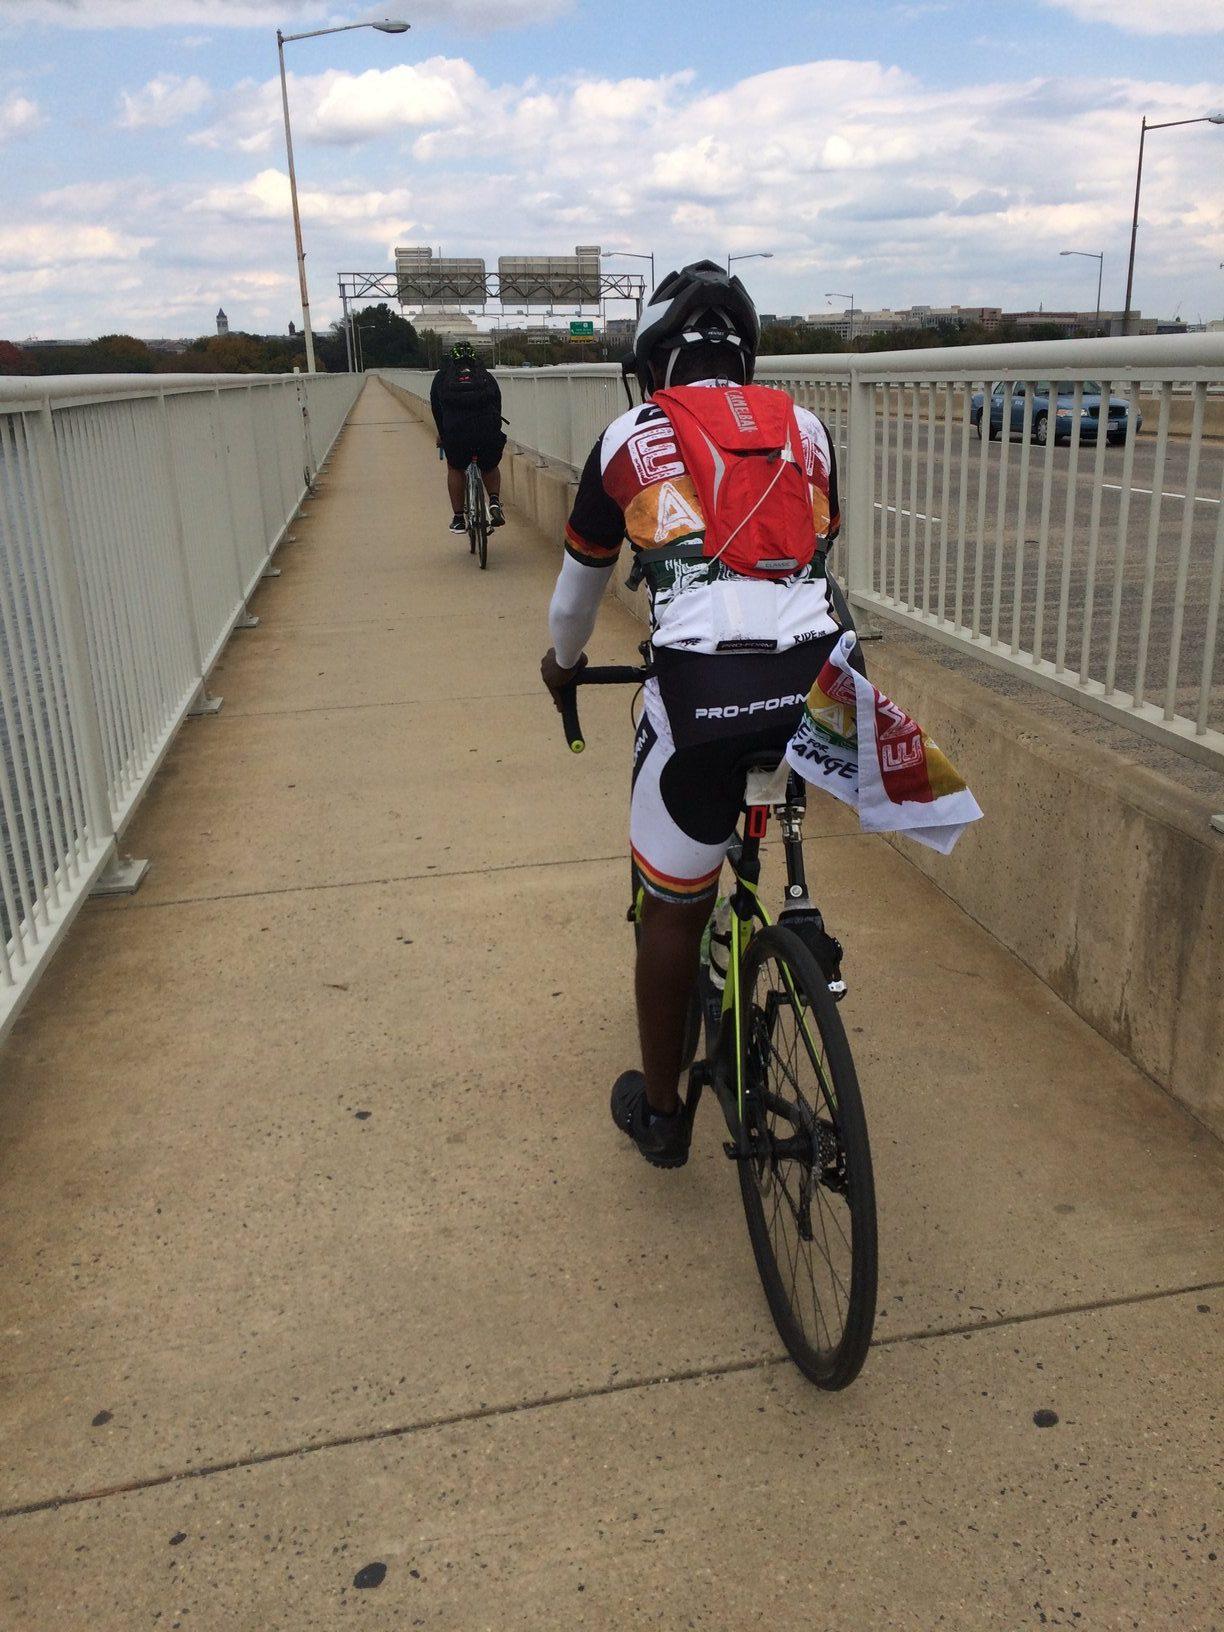 The Ride for Change has a bike path from Dallas, Texas to Washington, D.C.